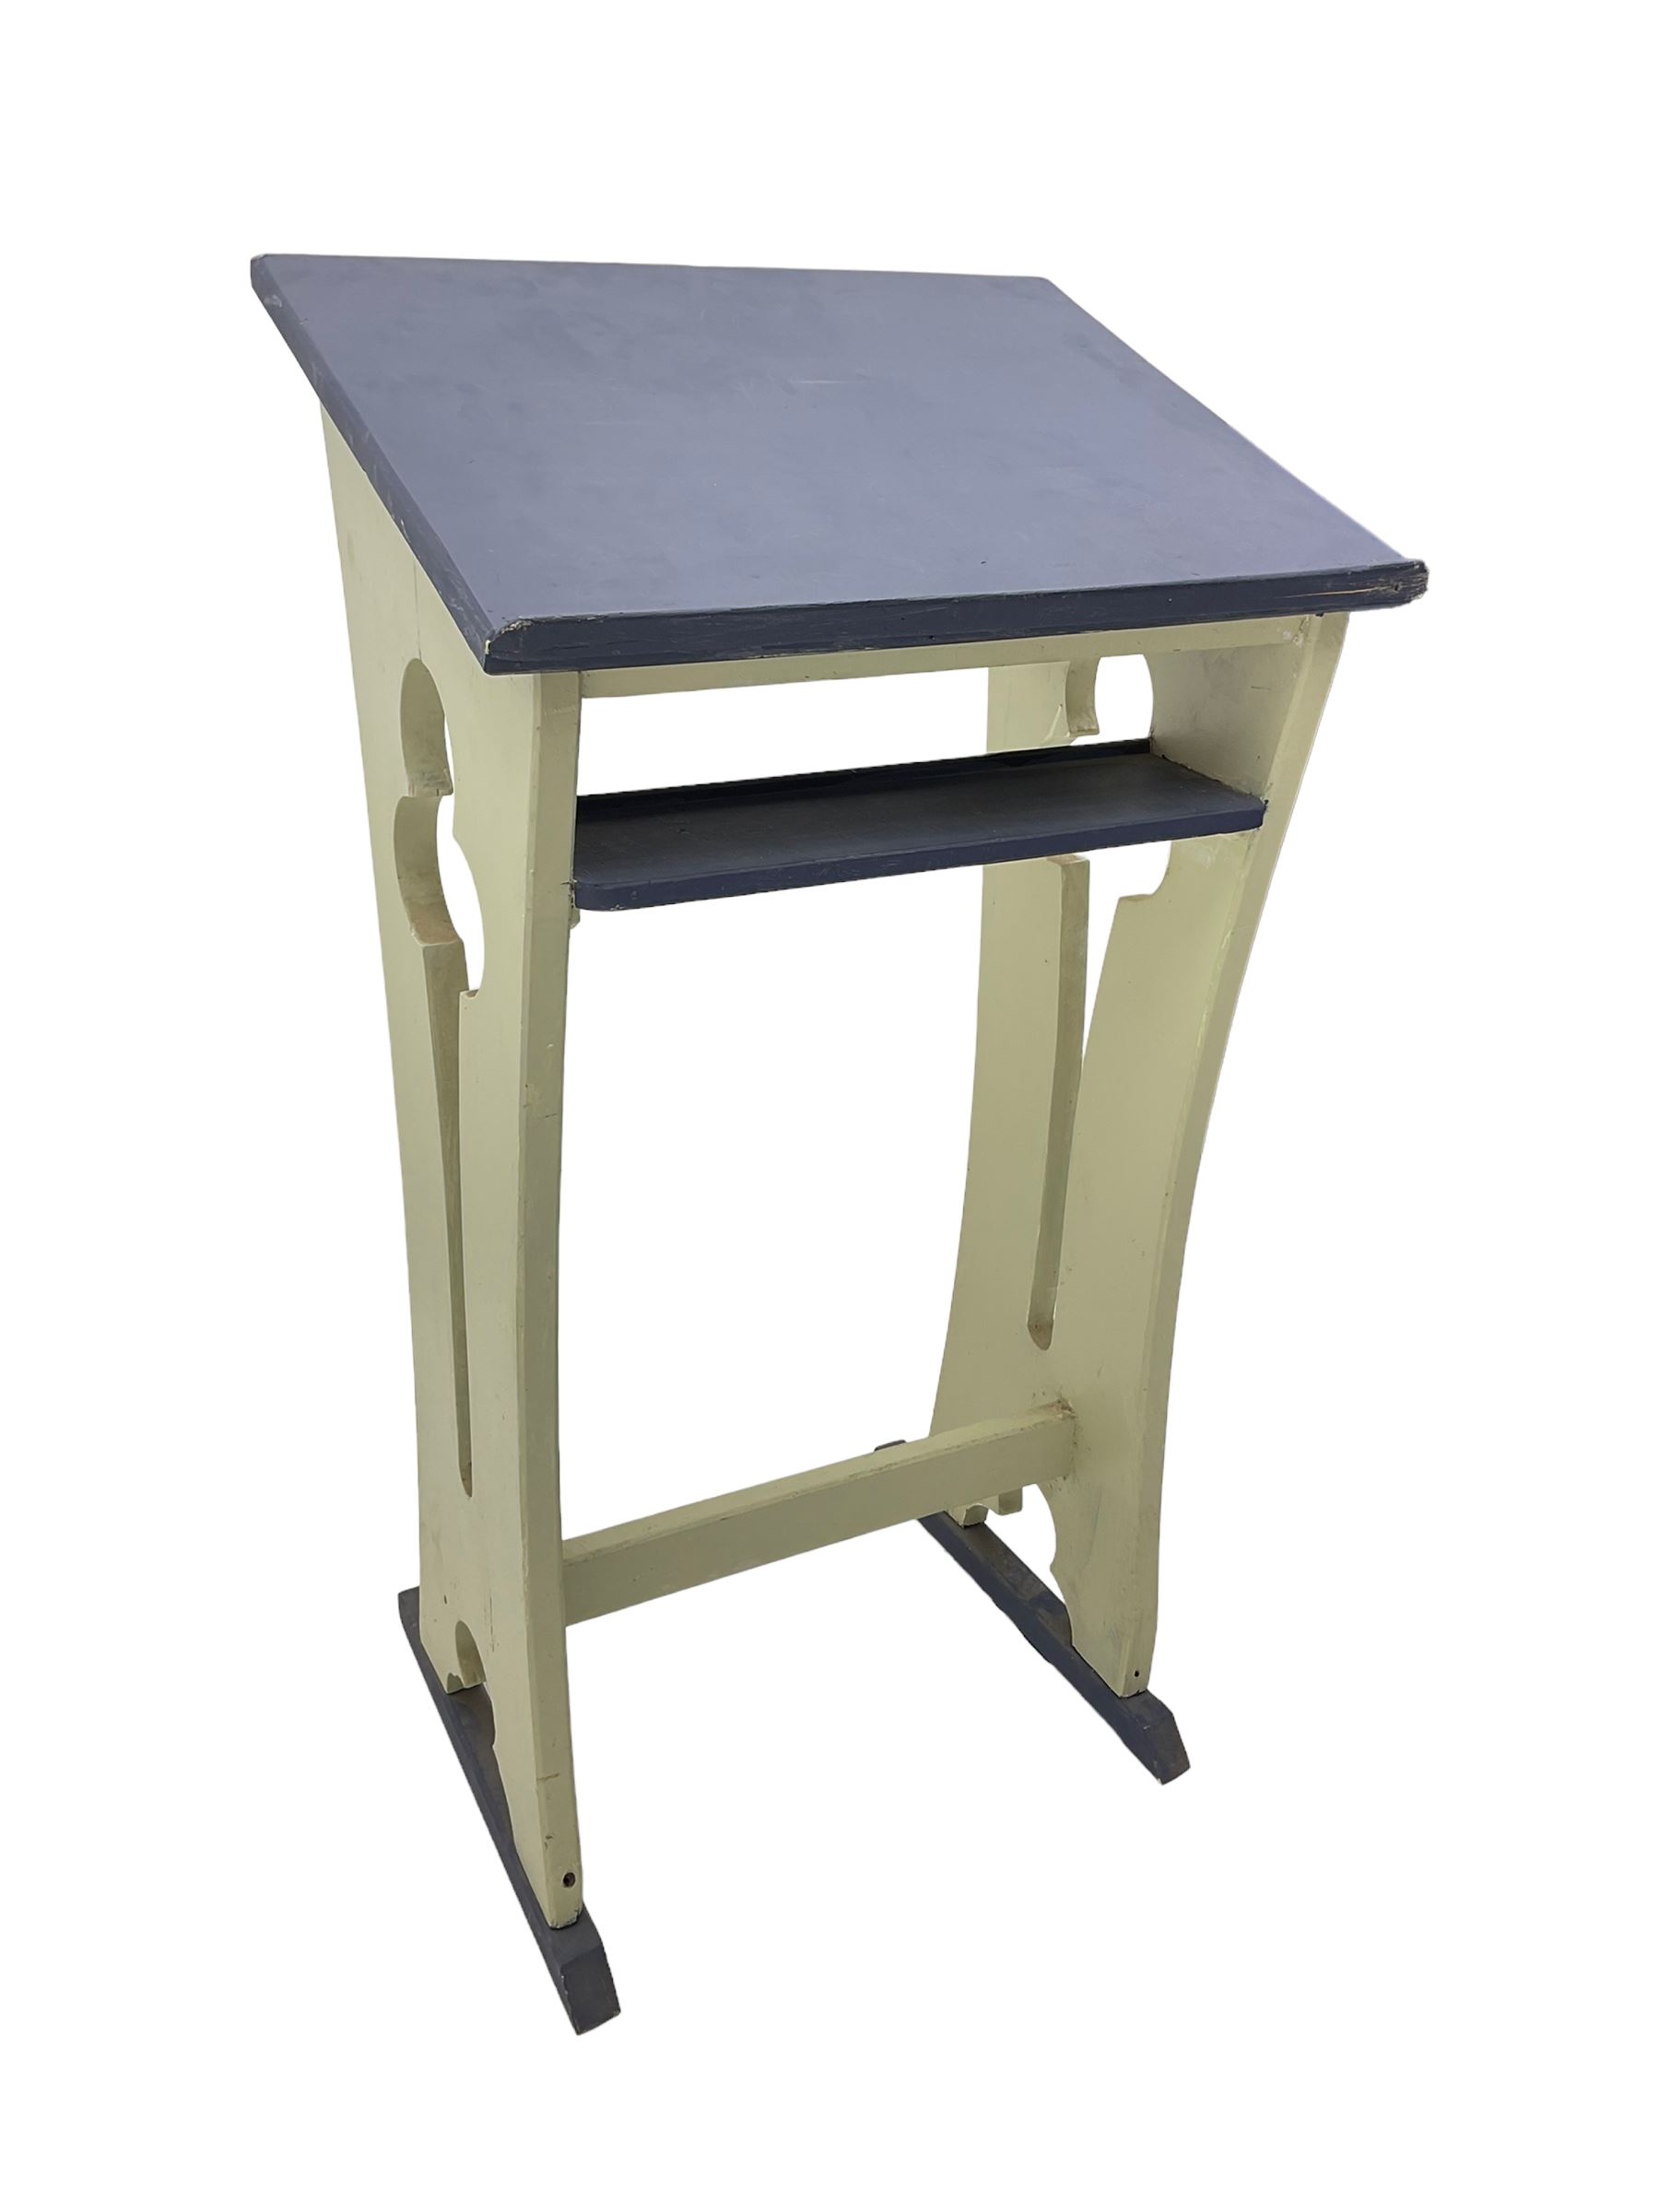 Mid-20th century painted pine ecclesiastical lectern - Image 8 of 10